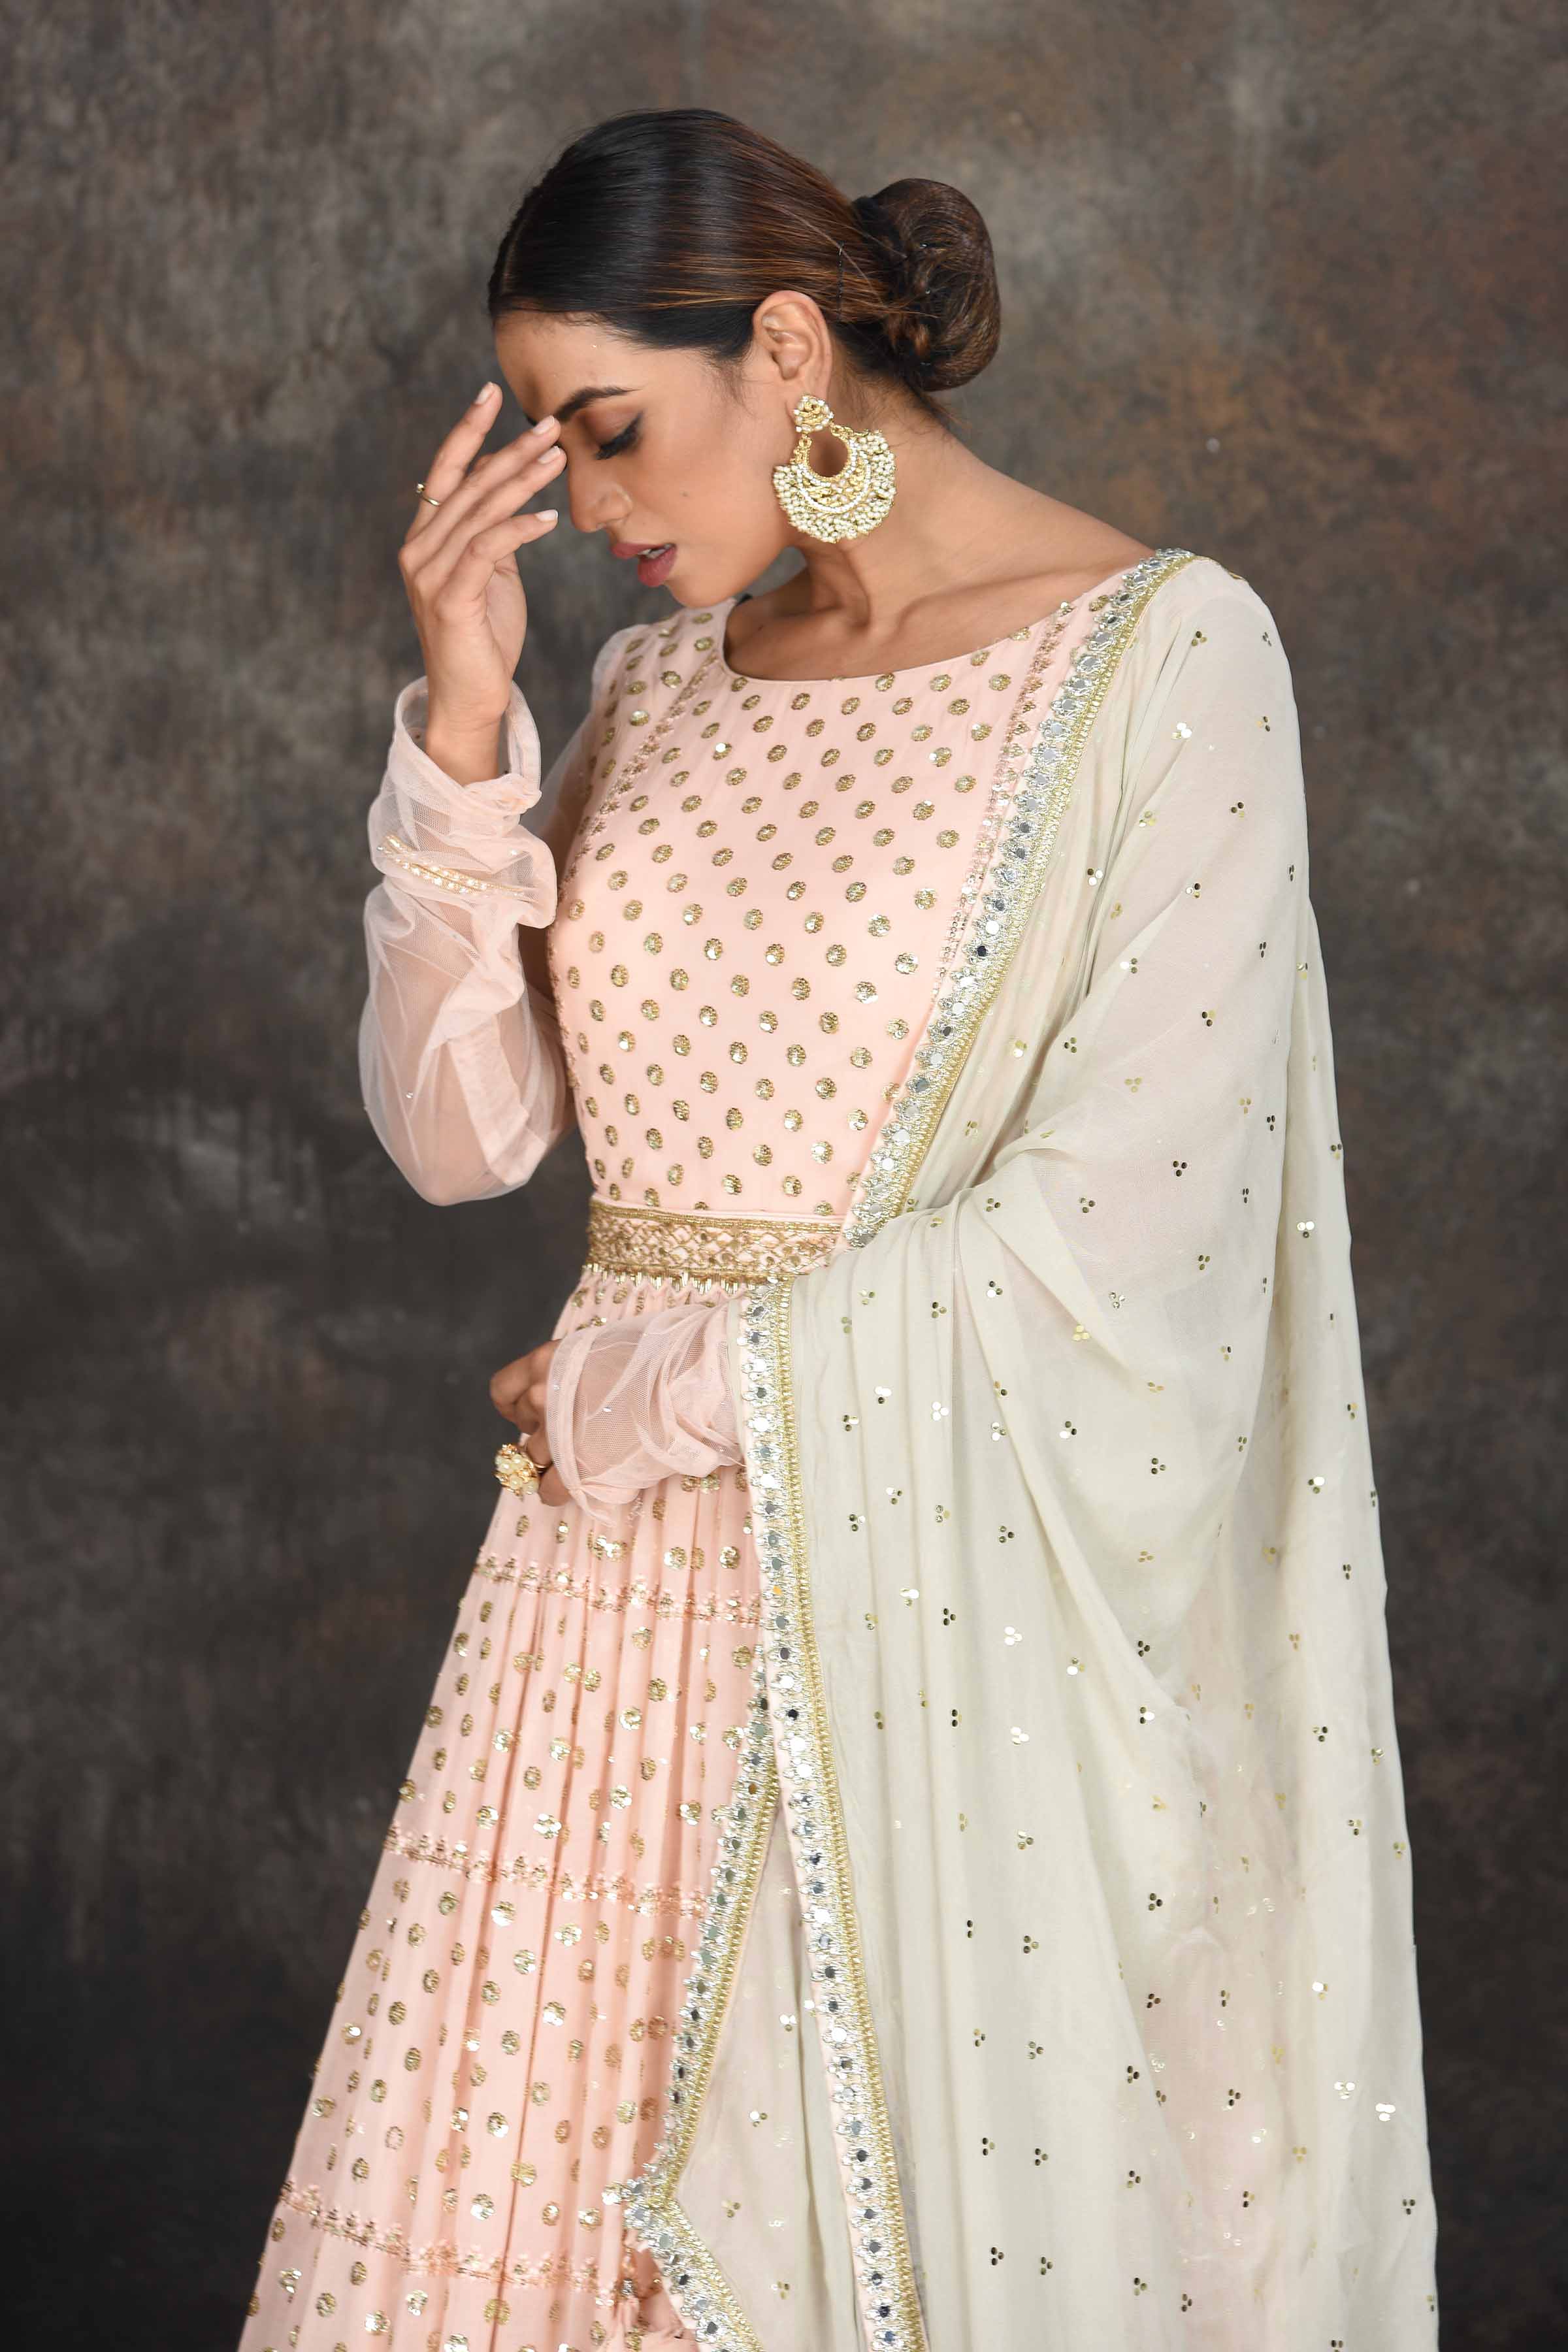 Buy beautiful light peach embroidered Anarkali suit online in USA with mint green embroidered dupatta. Dazzle at sangeet and wedding occasions in this beautiful designer lehengas, Anarkali suits, sharara suit, bridal gowns, bridal lehengas from Pure Elegance Indian fashion store in USA.-closeup